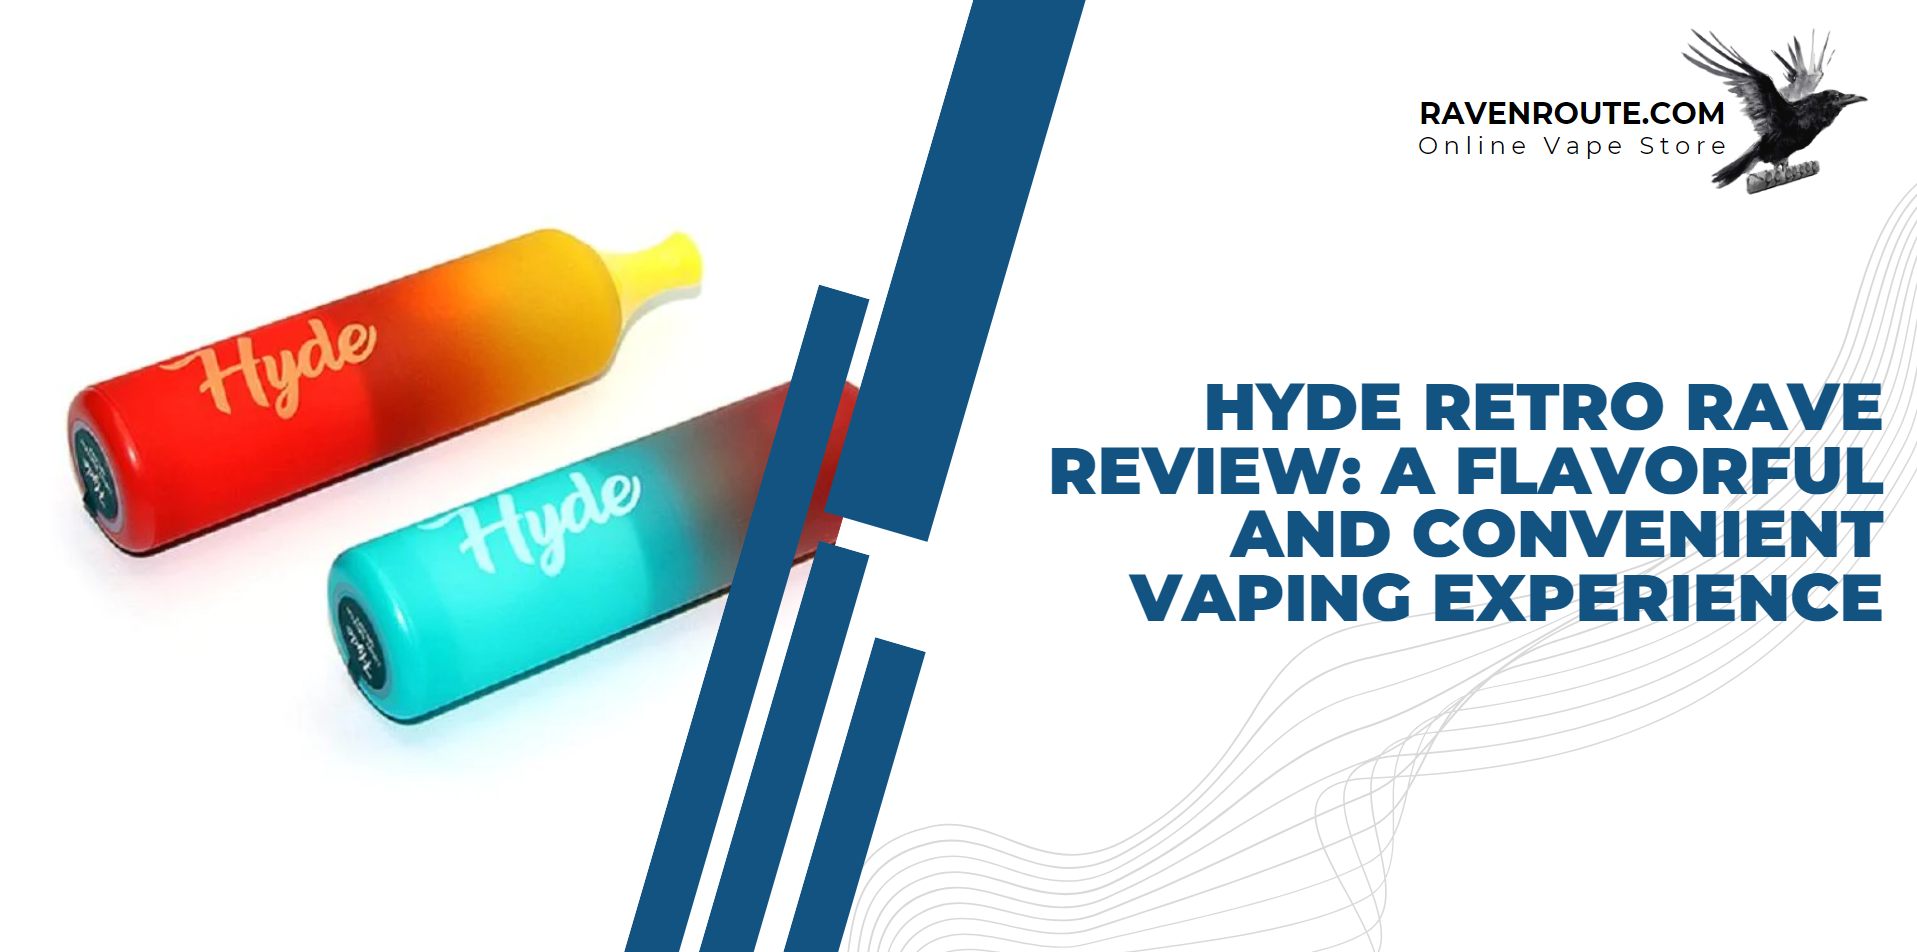 Hyde Retro Rave Review: A Flavorful and Convenient Vaping Experience